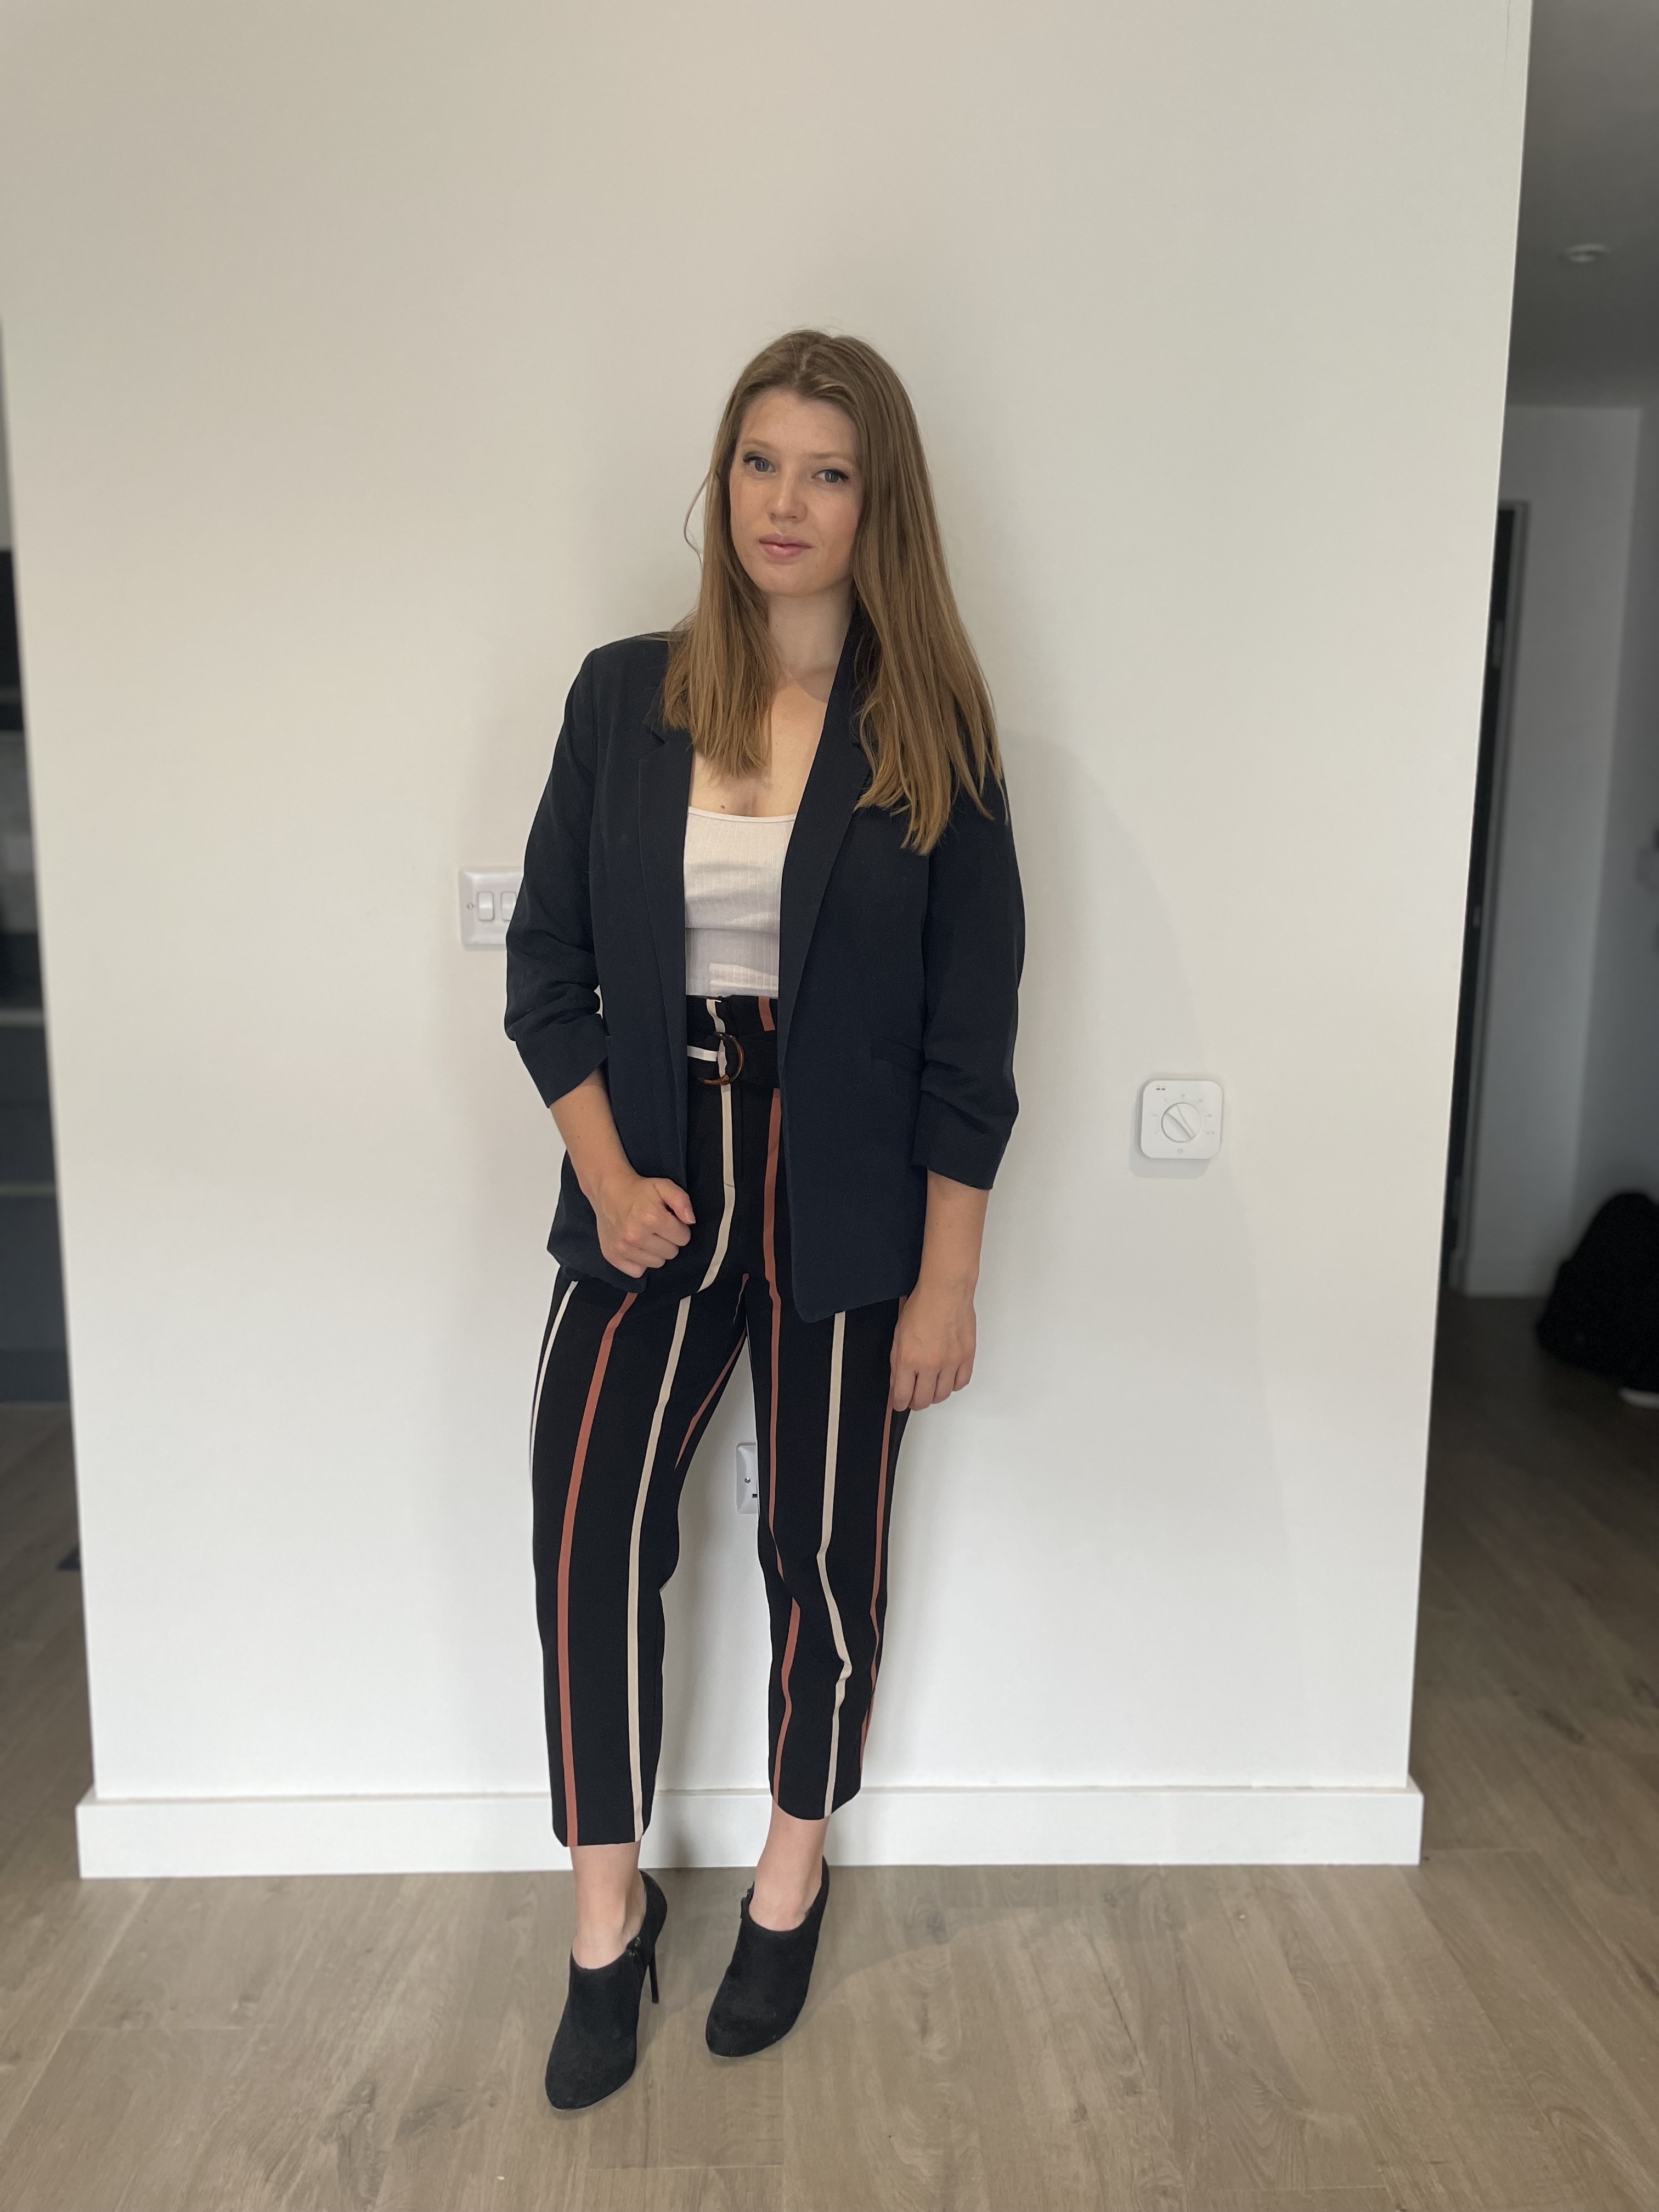 Outfit is tailored pinstripe trousers with a blue blazer and black heels.